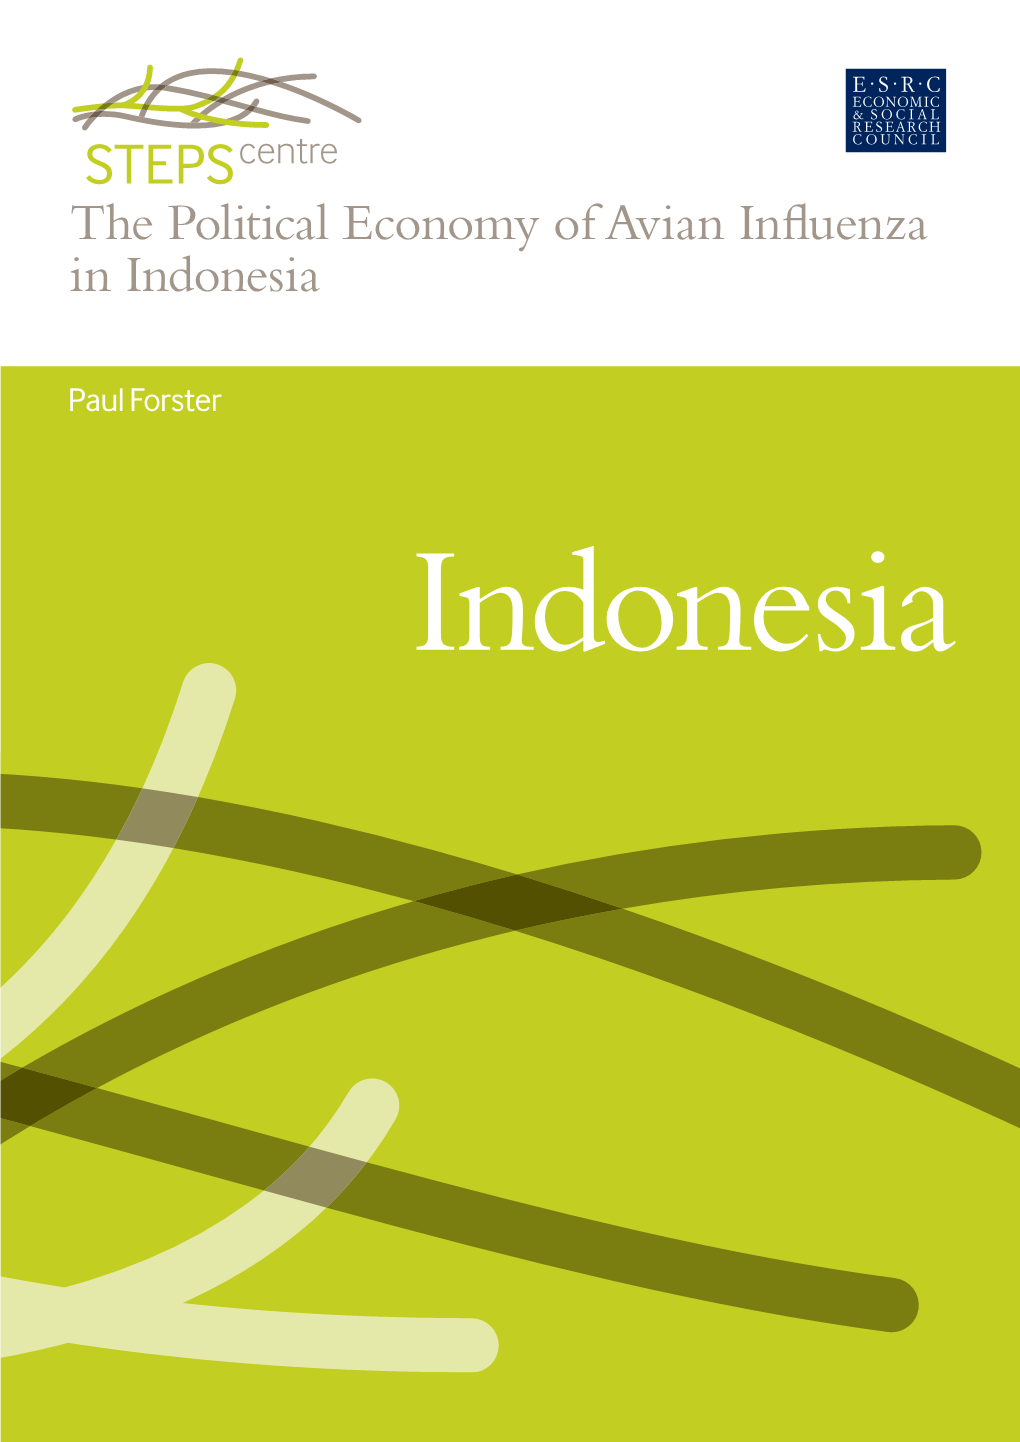 The Political Economy of Avian Influenza in Indonesia